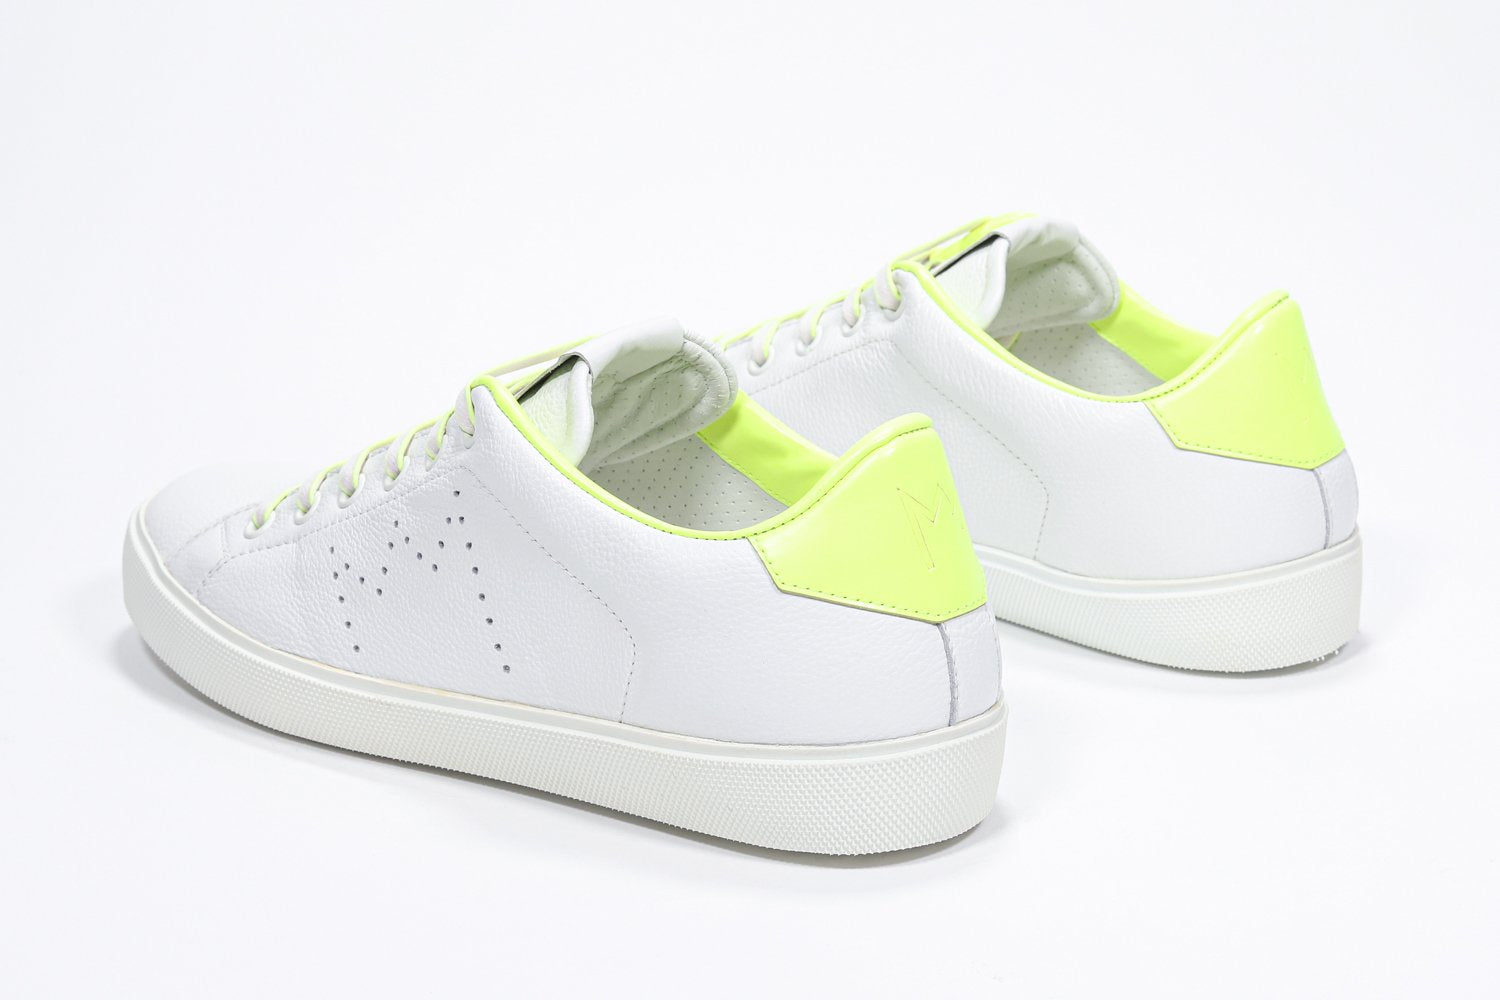 LEATHER CROWN: sneakers for man - White  Leather Crown sneakers MLC06  online at